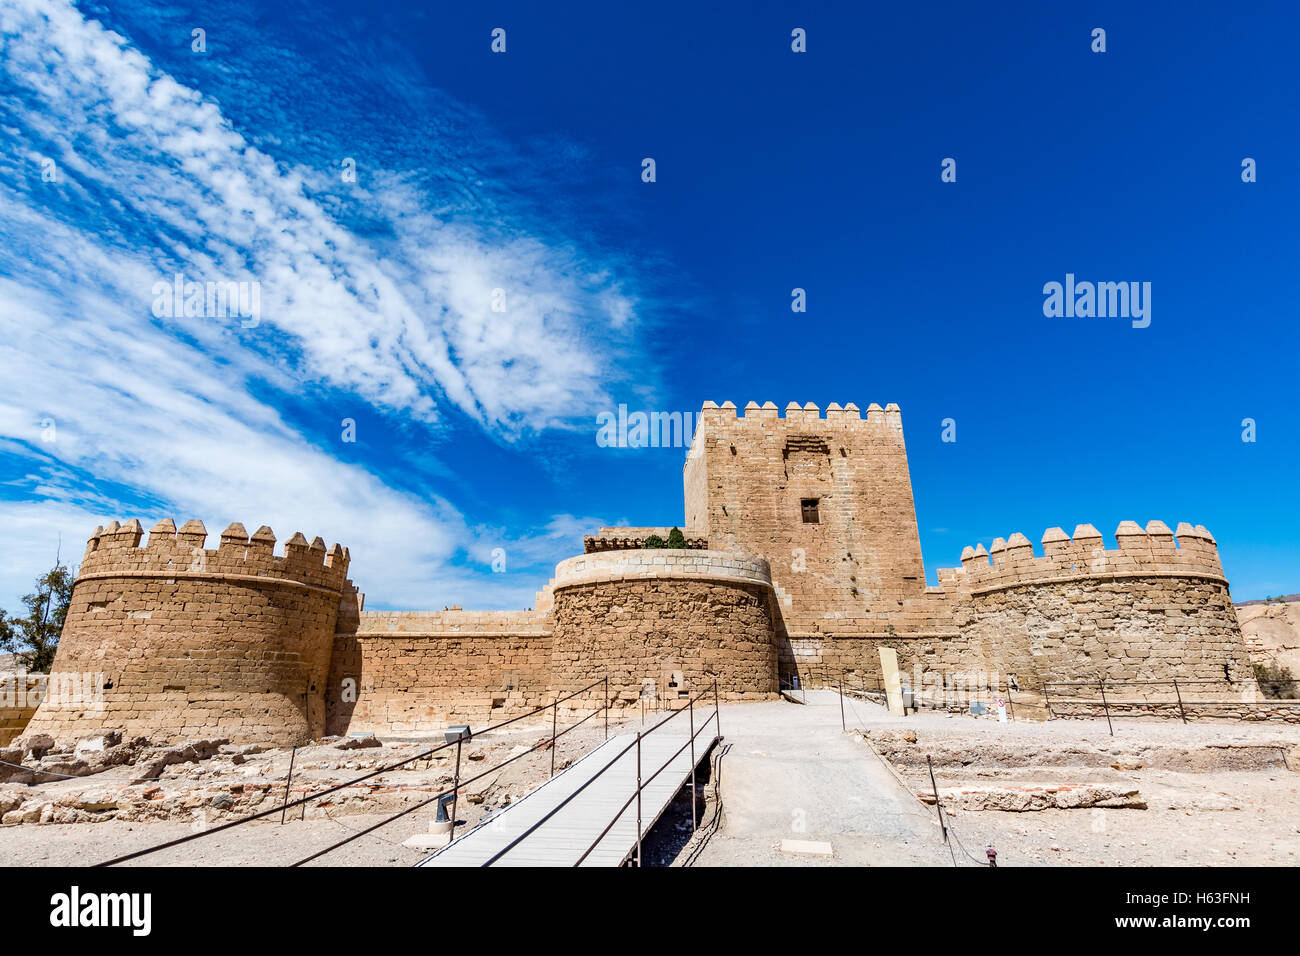 View of the Christian part of the Alcazaba in Almeria (Almeria Castle) on a beautiful day, horizontal, Spain Stock Photo